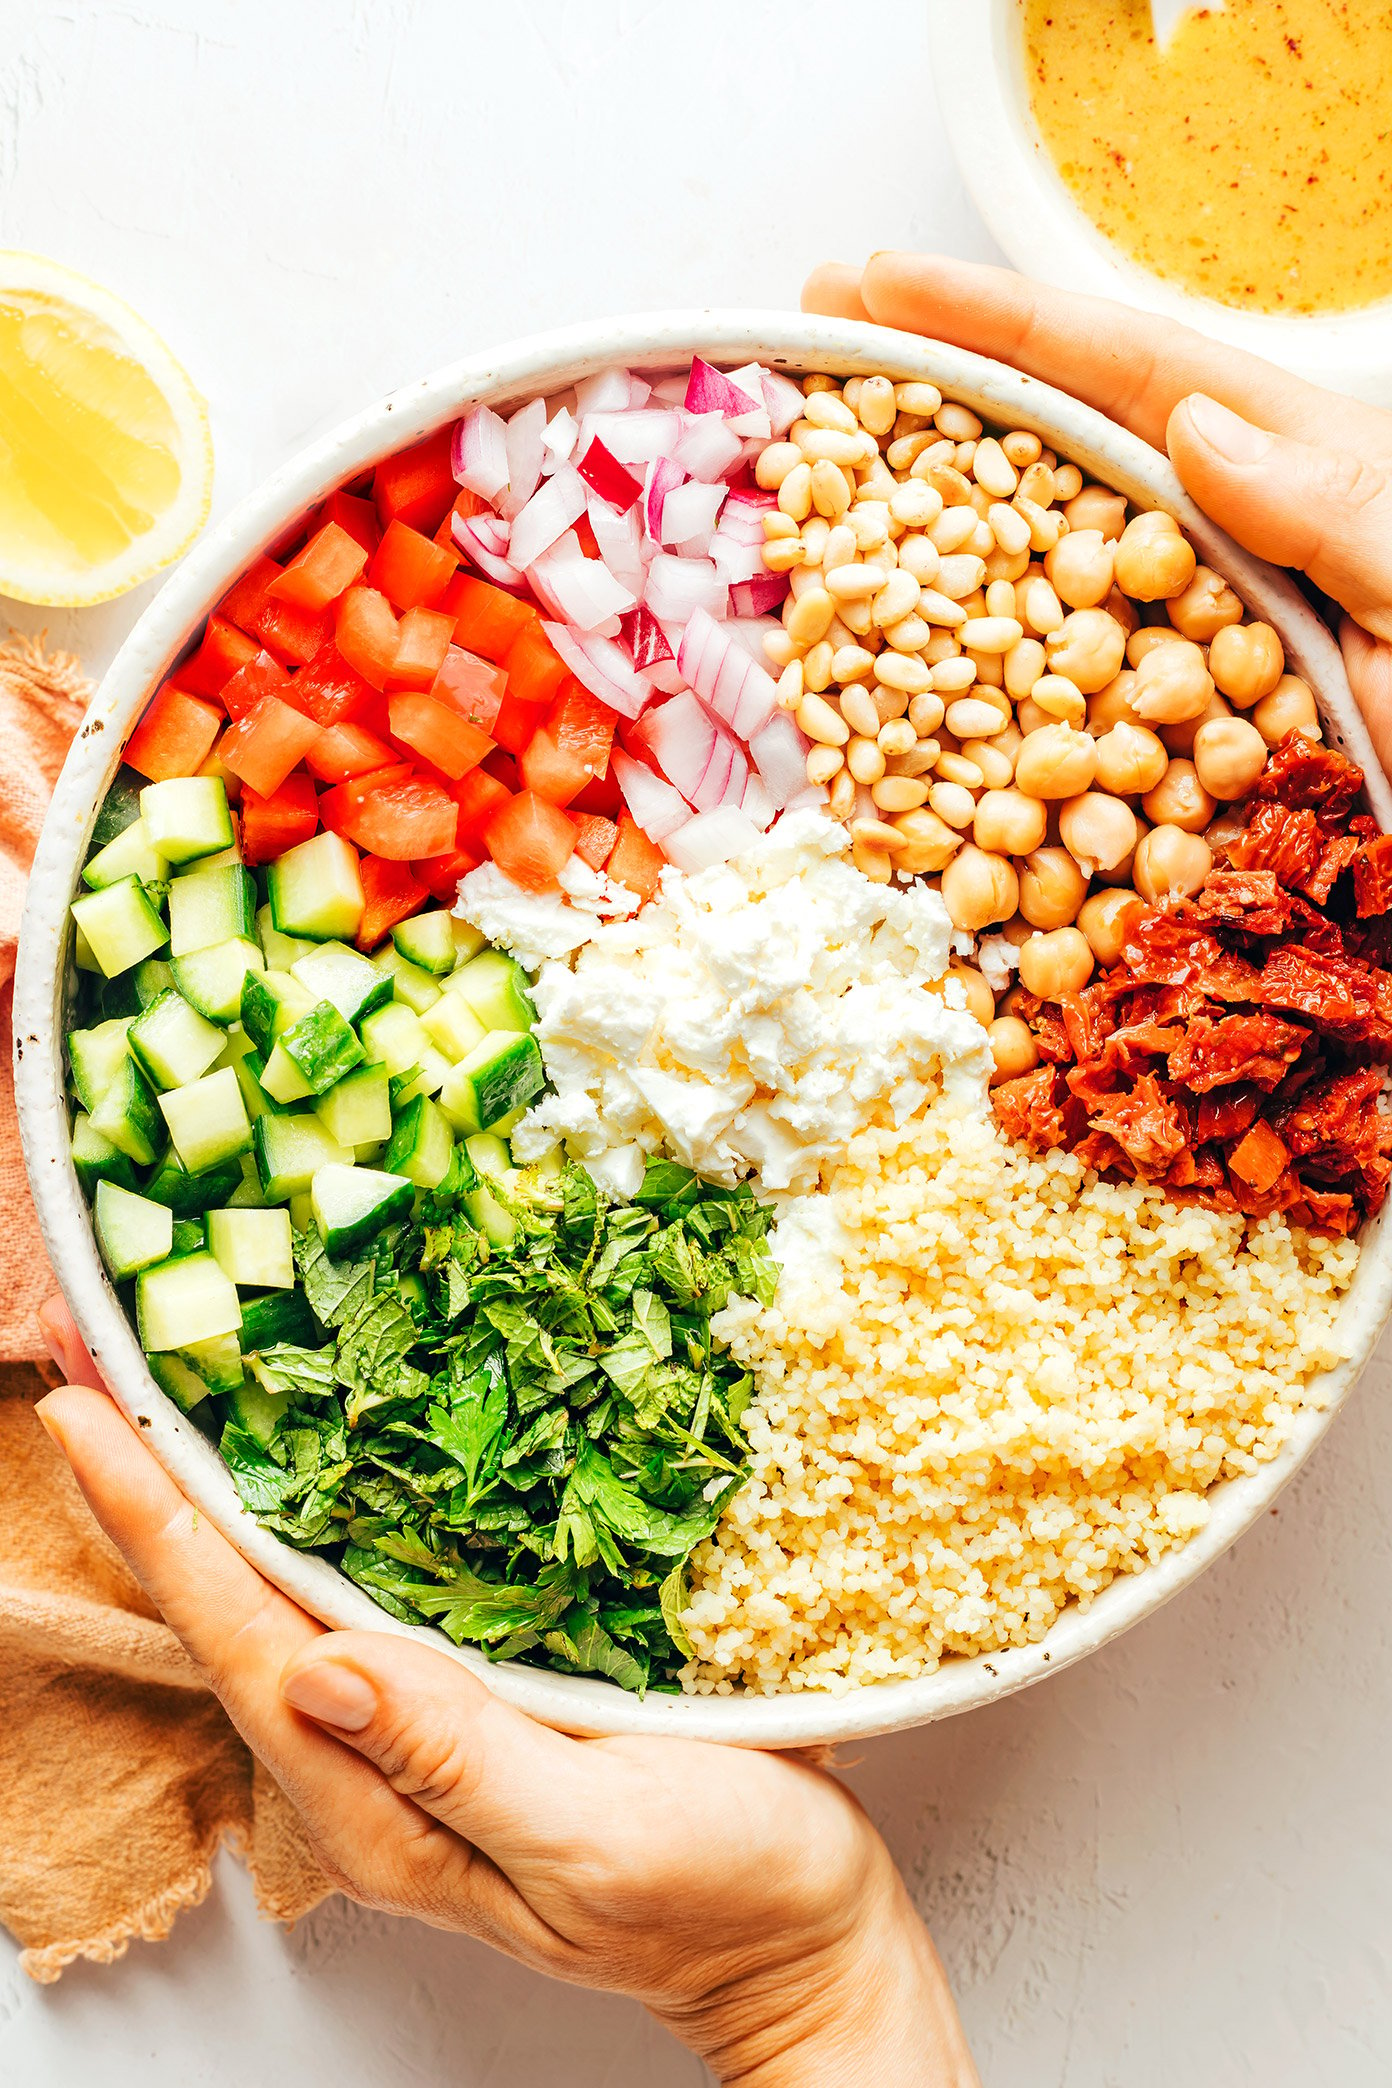 Couscous Salad Ingredients in Bowl